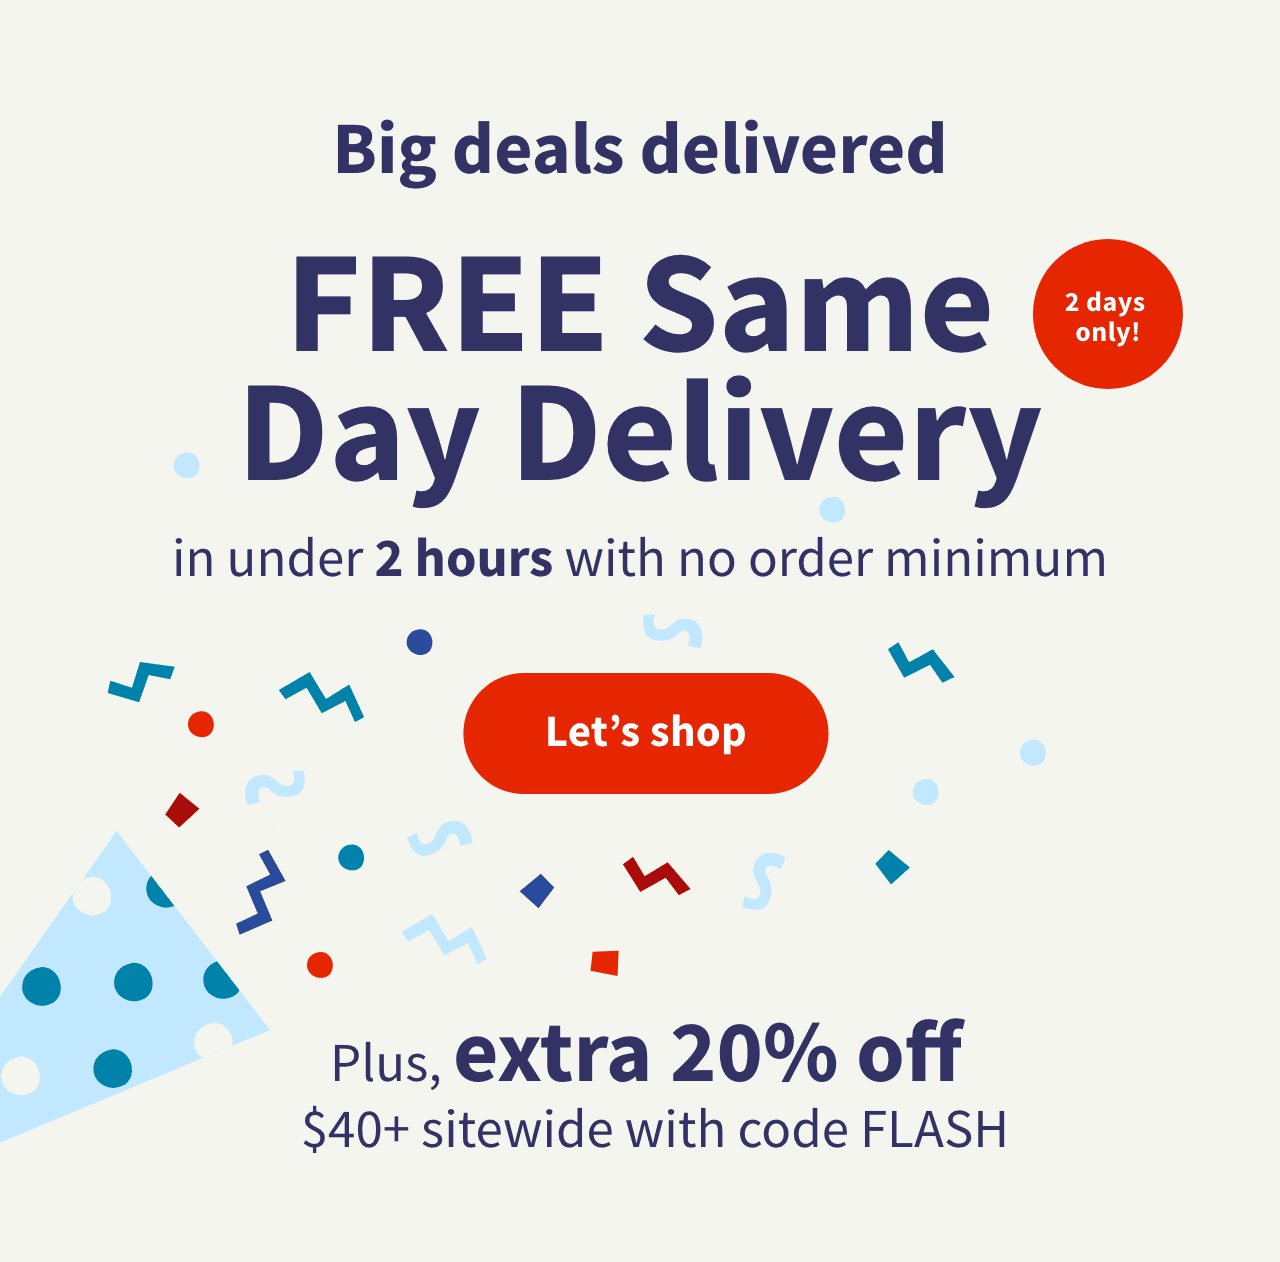 2 days only! Big deals delivered. FREE Same Day Delivery in under 2 hours with no order minimum. Plus, extra 20% off sitewide $40+ with code FLASH. Let's shop.